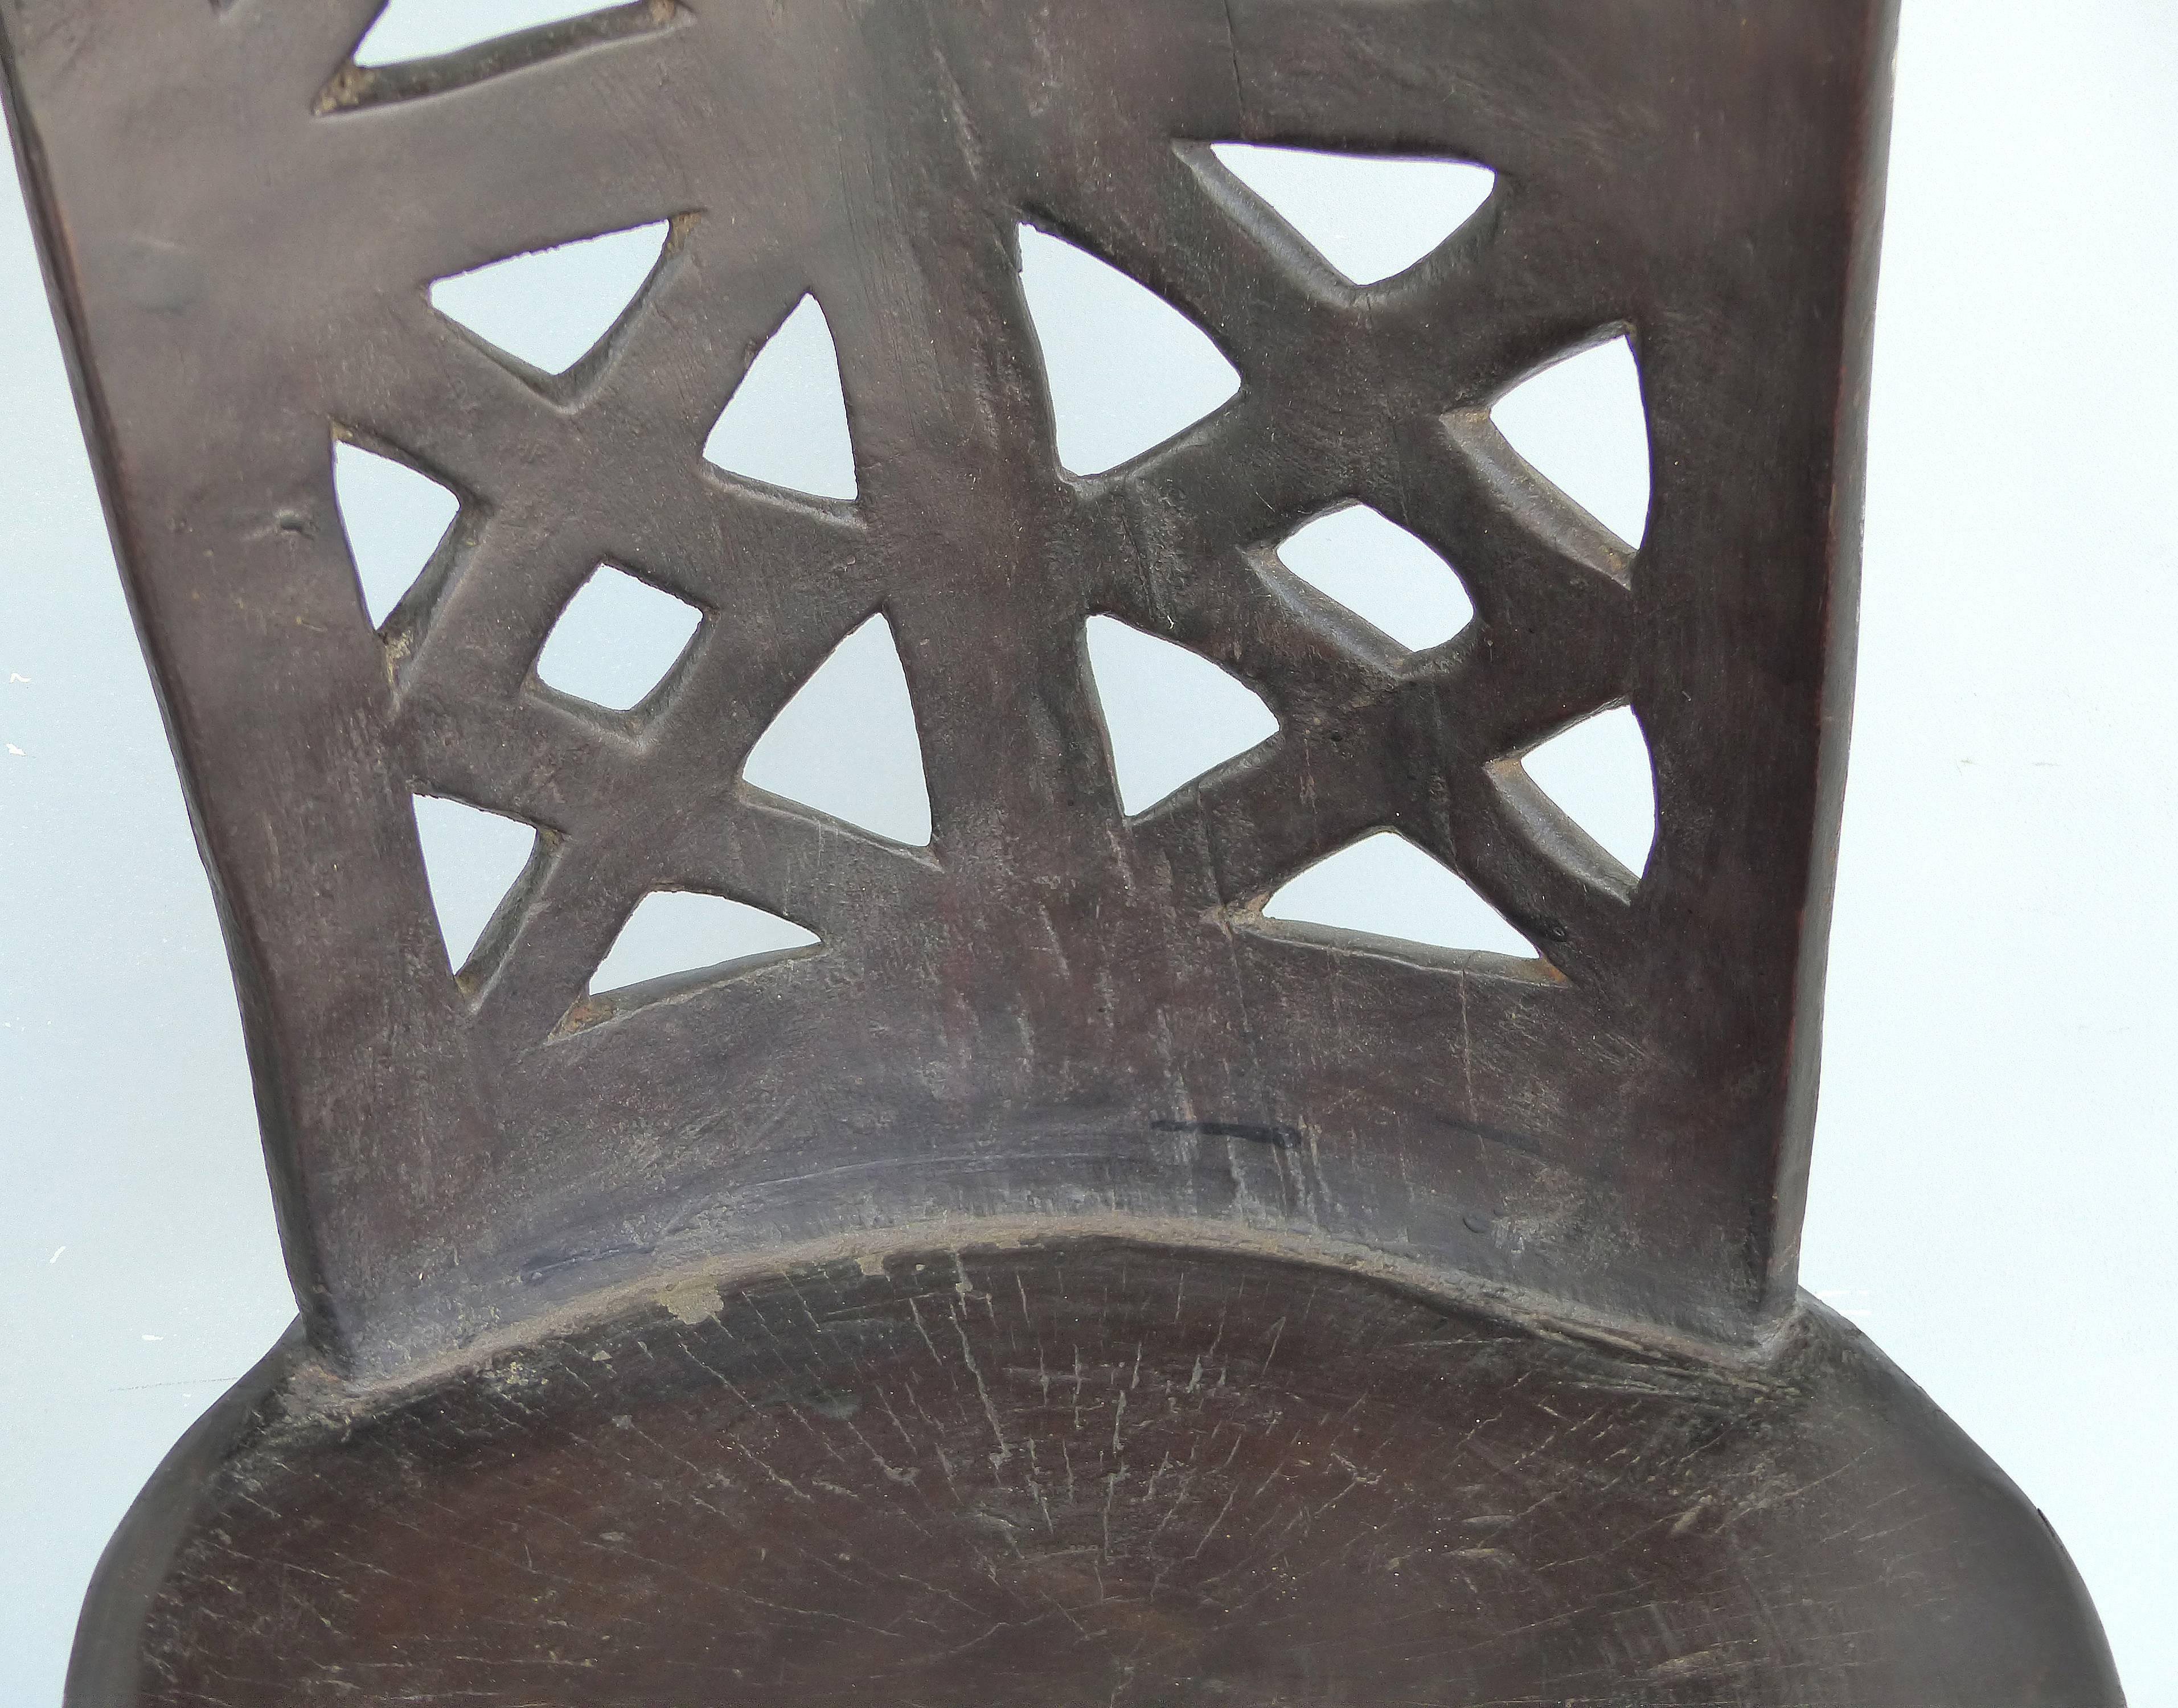 20th Century Rare Ethiopian Three-Legged Coptic Chair with Carved Crosses in Back Slat